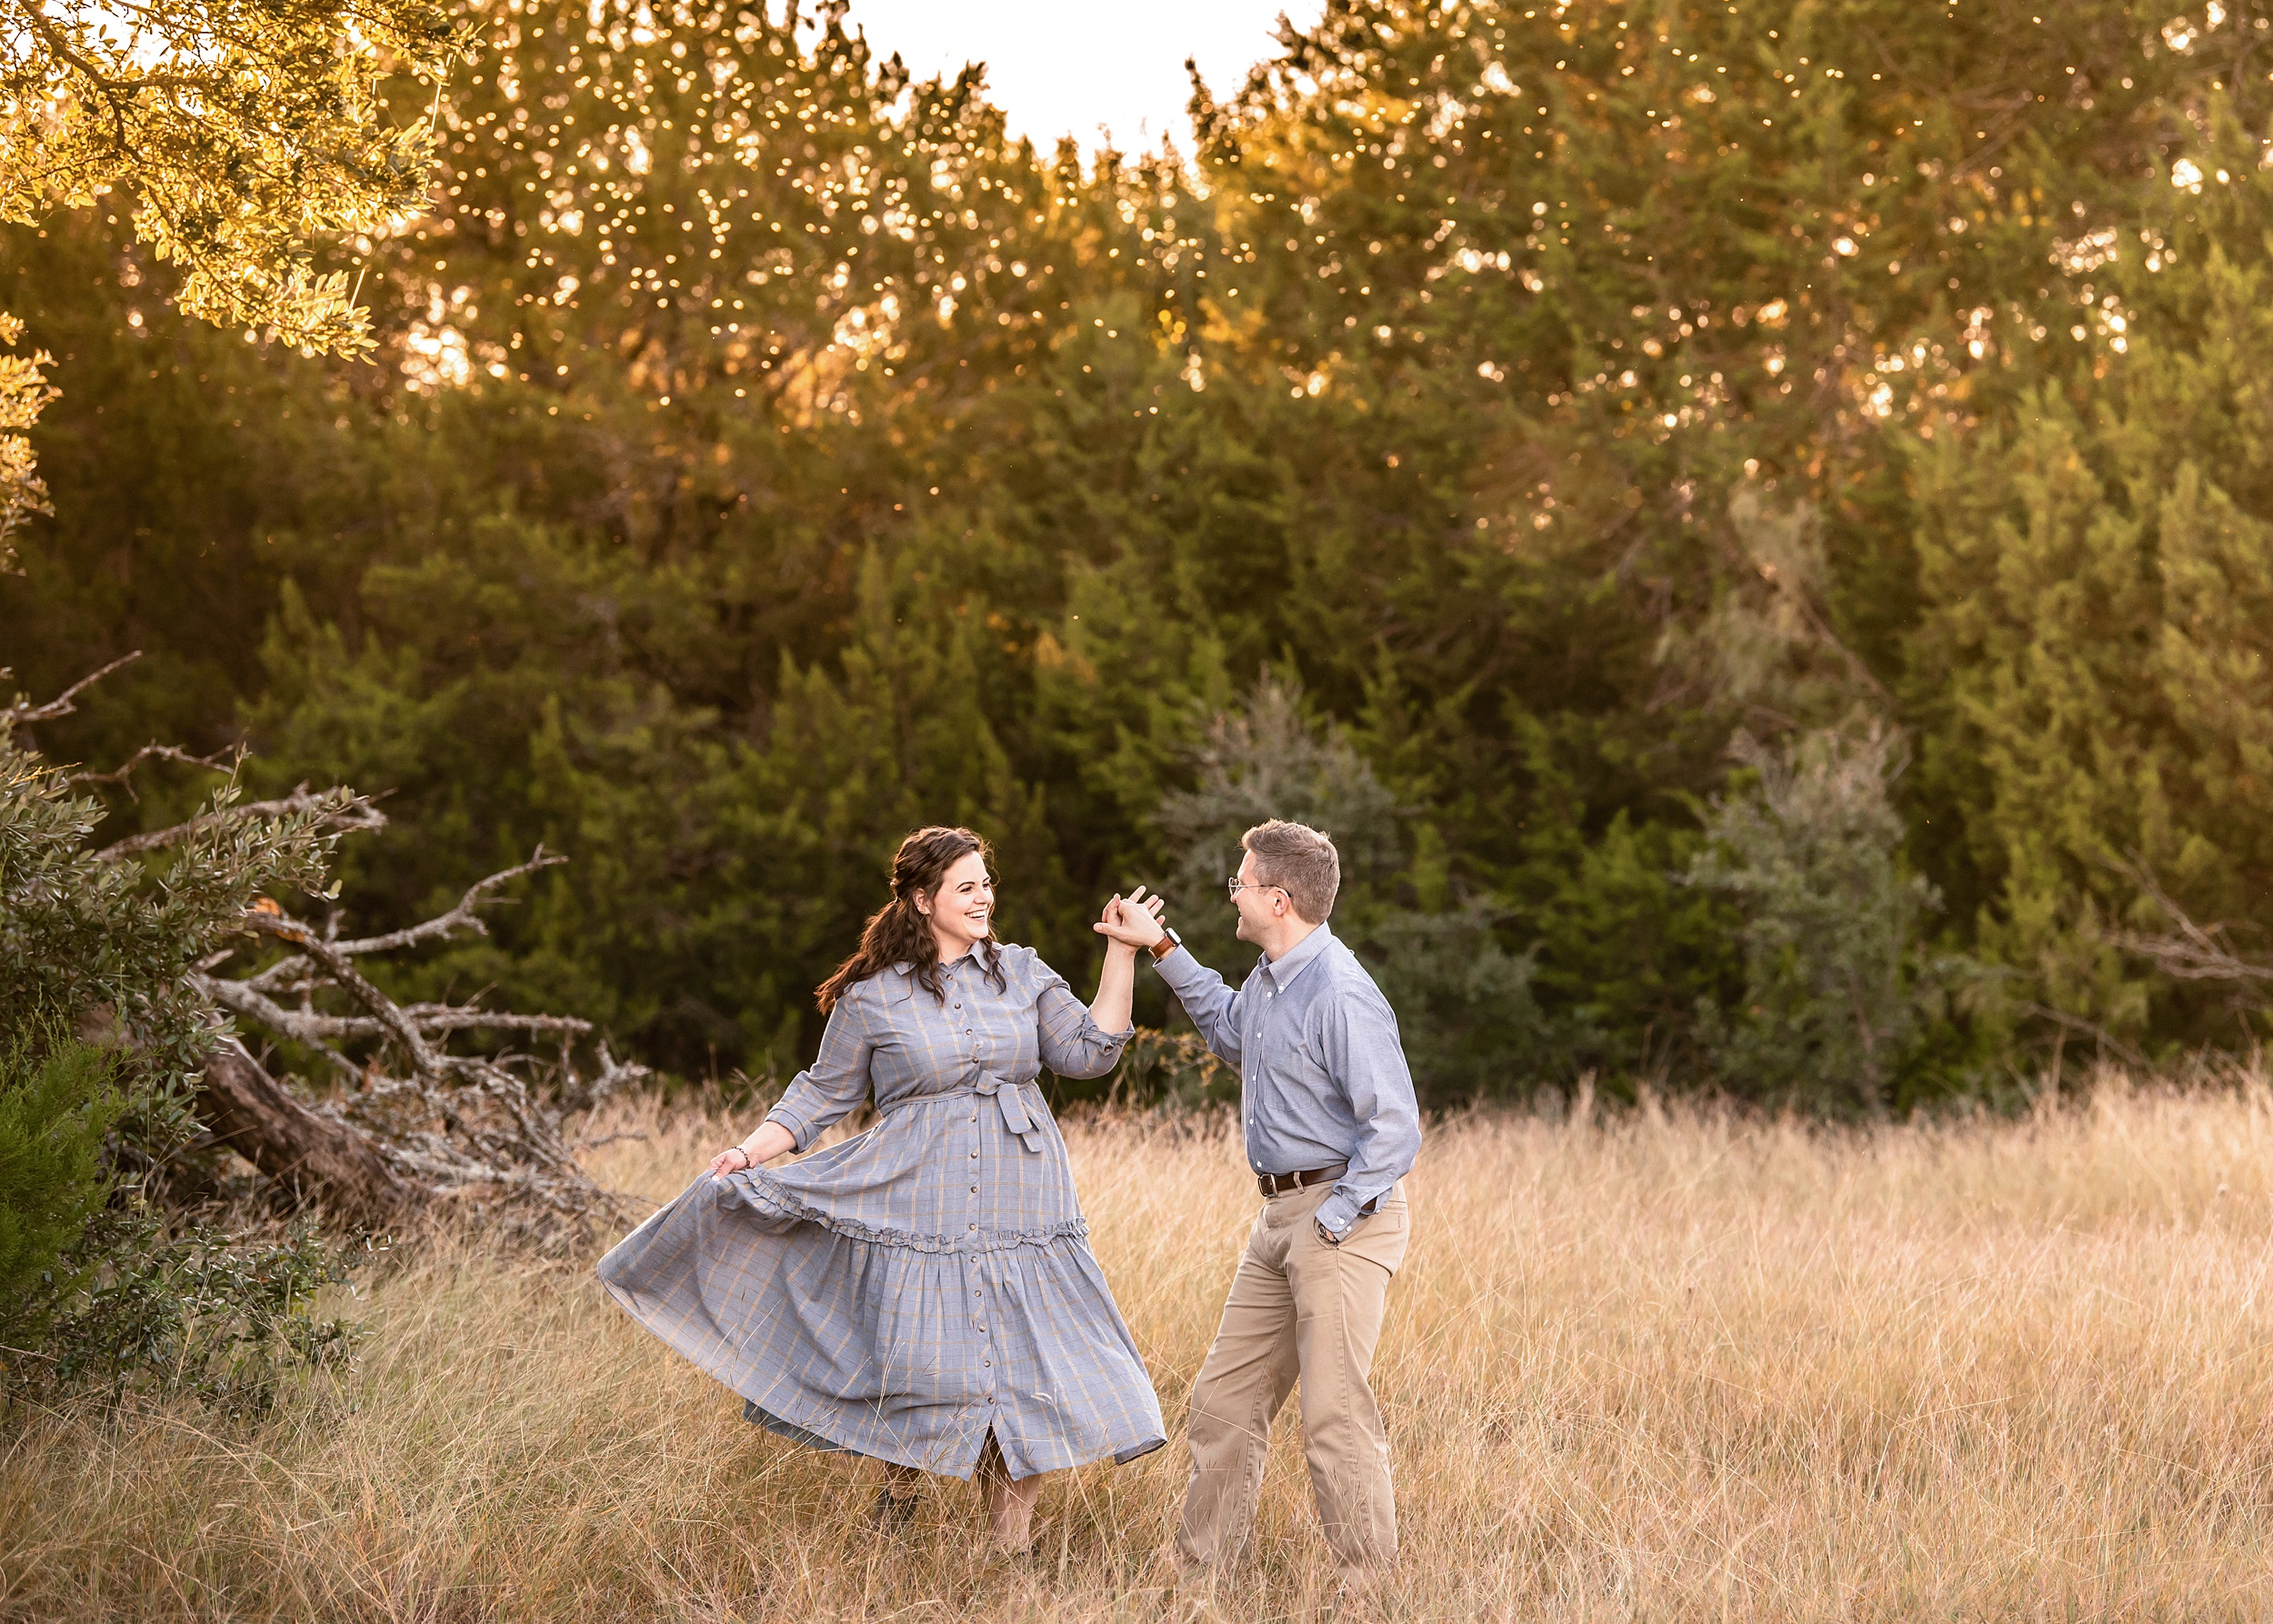 A happy couple dances in a park field at sunset during one of the date ideas in waco